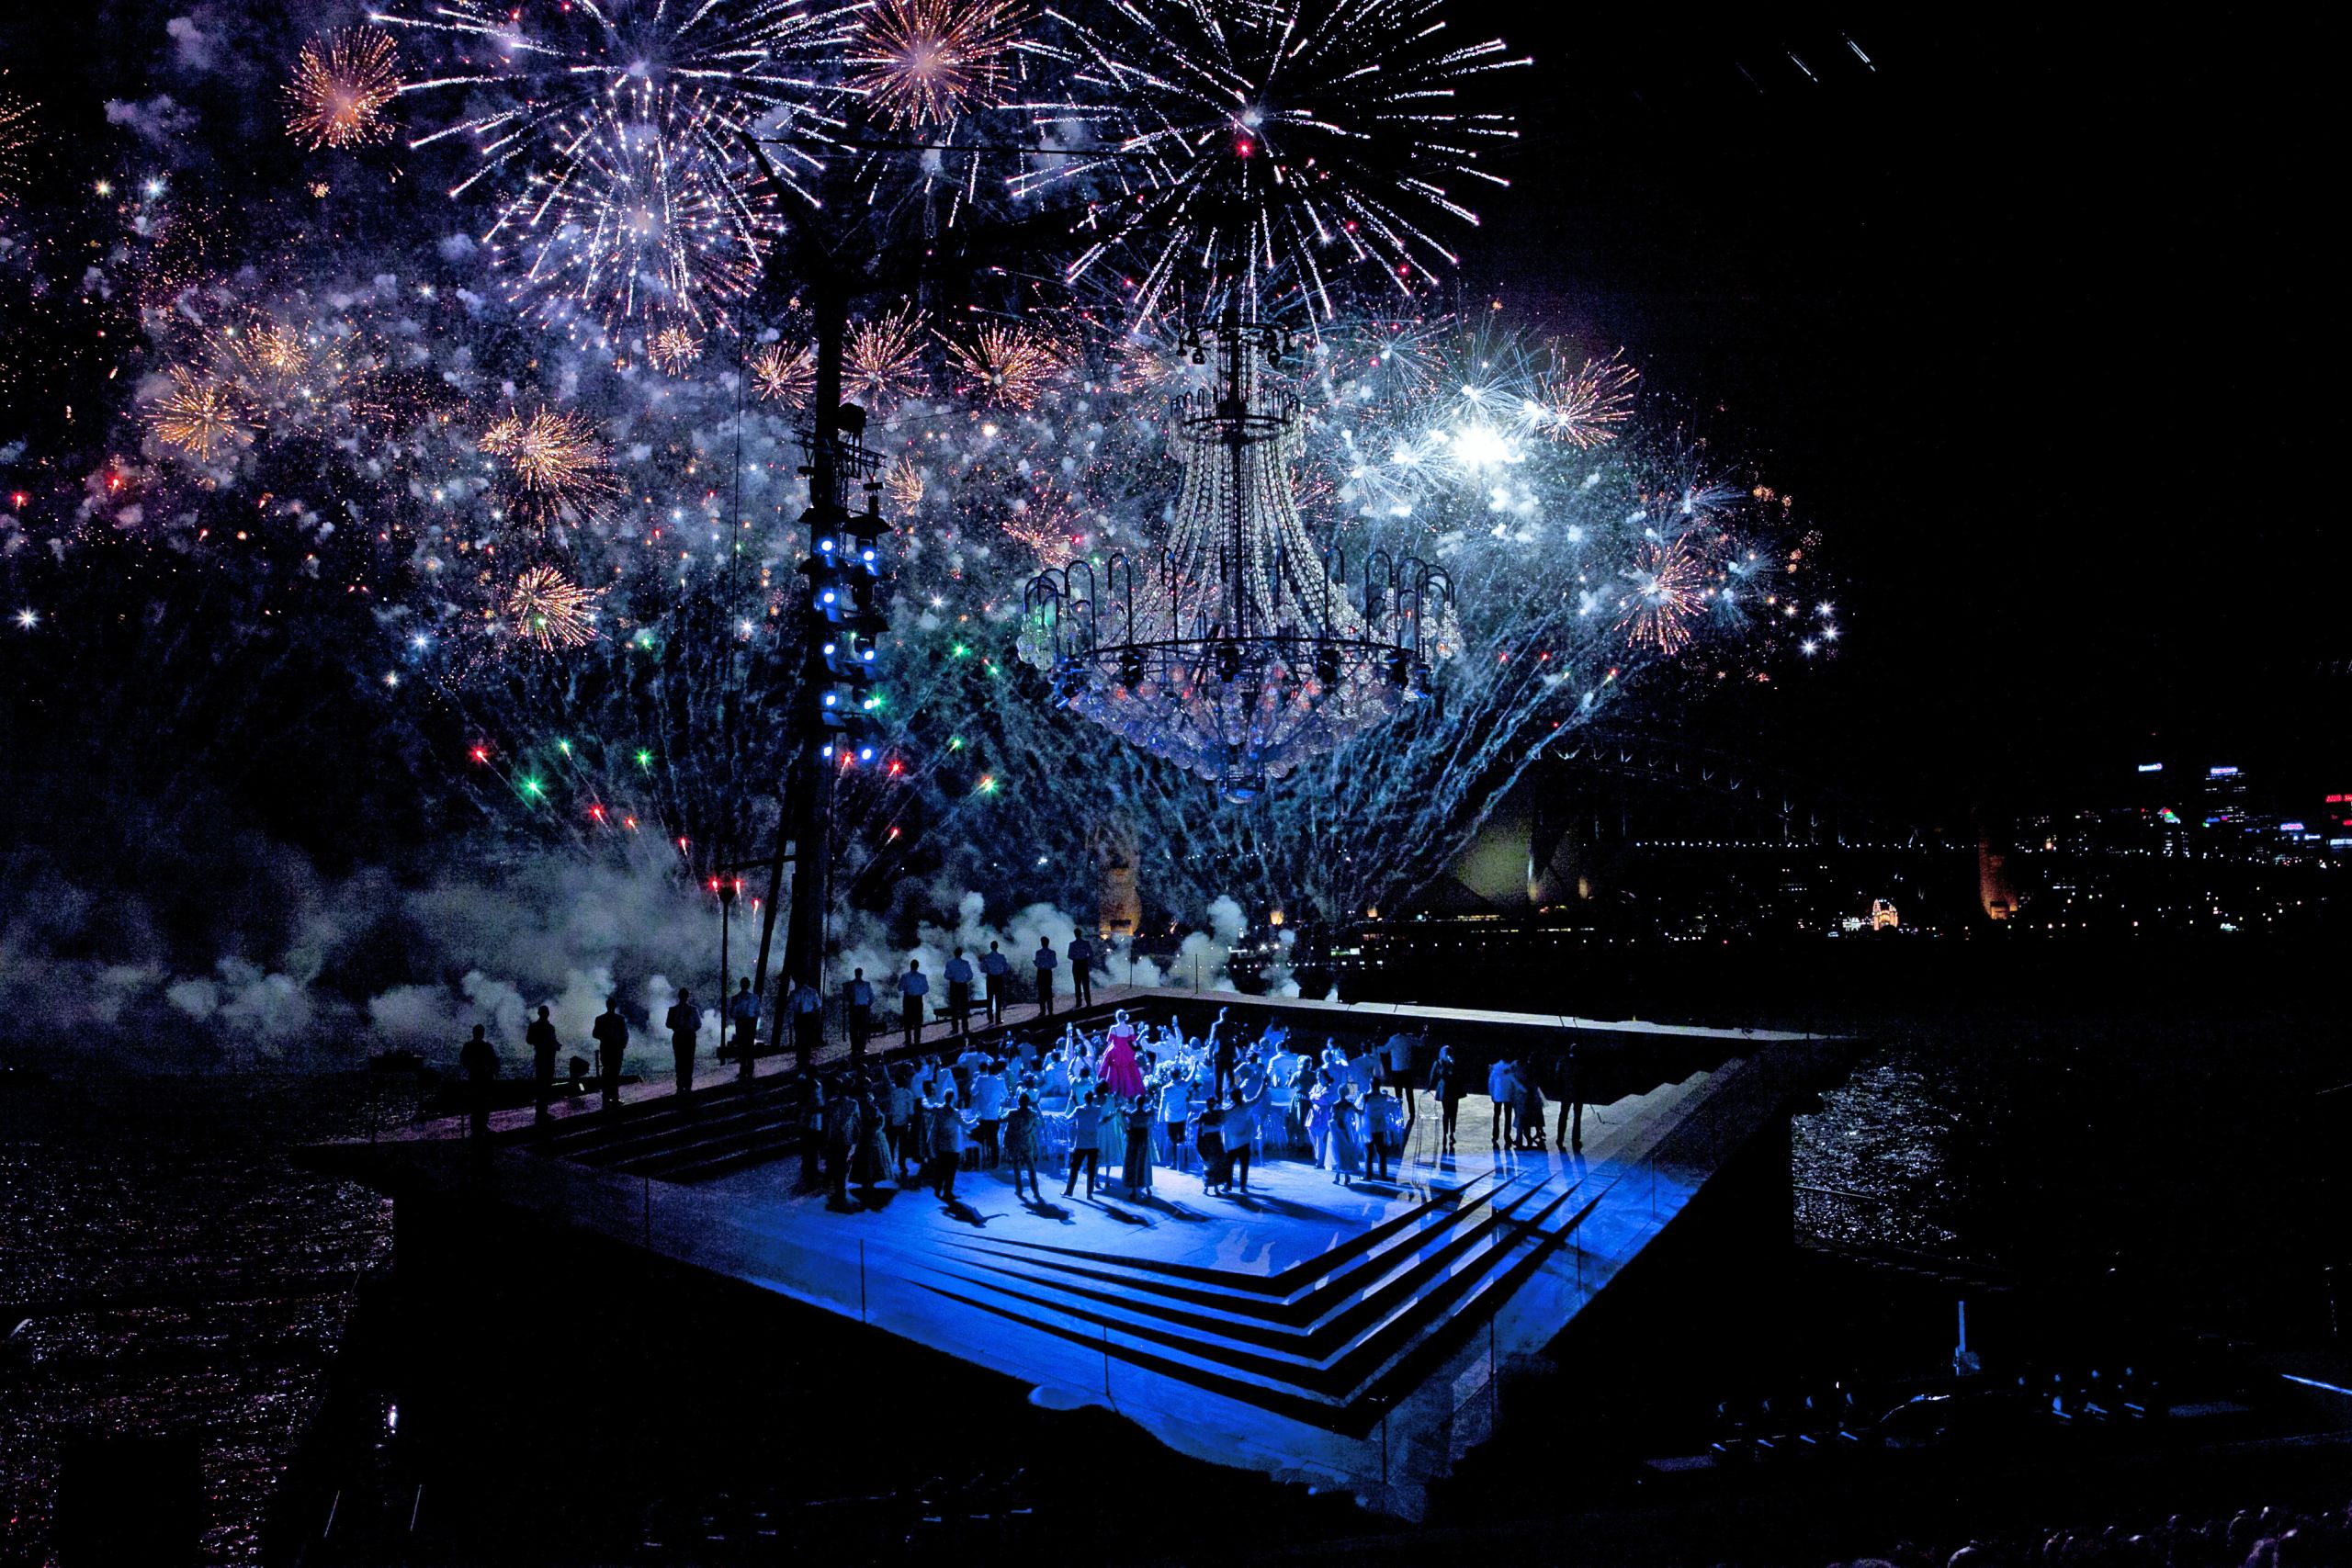 Fireworks over the stage of Opera Australia's production of La Traviata on Sydney Harbour in 2012 